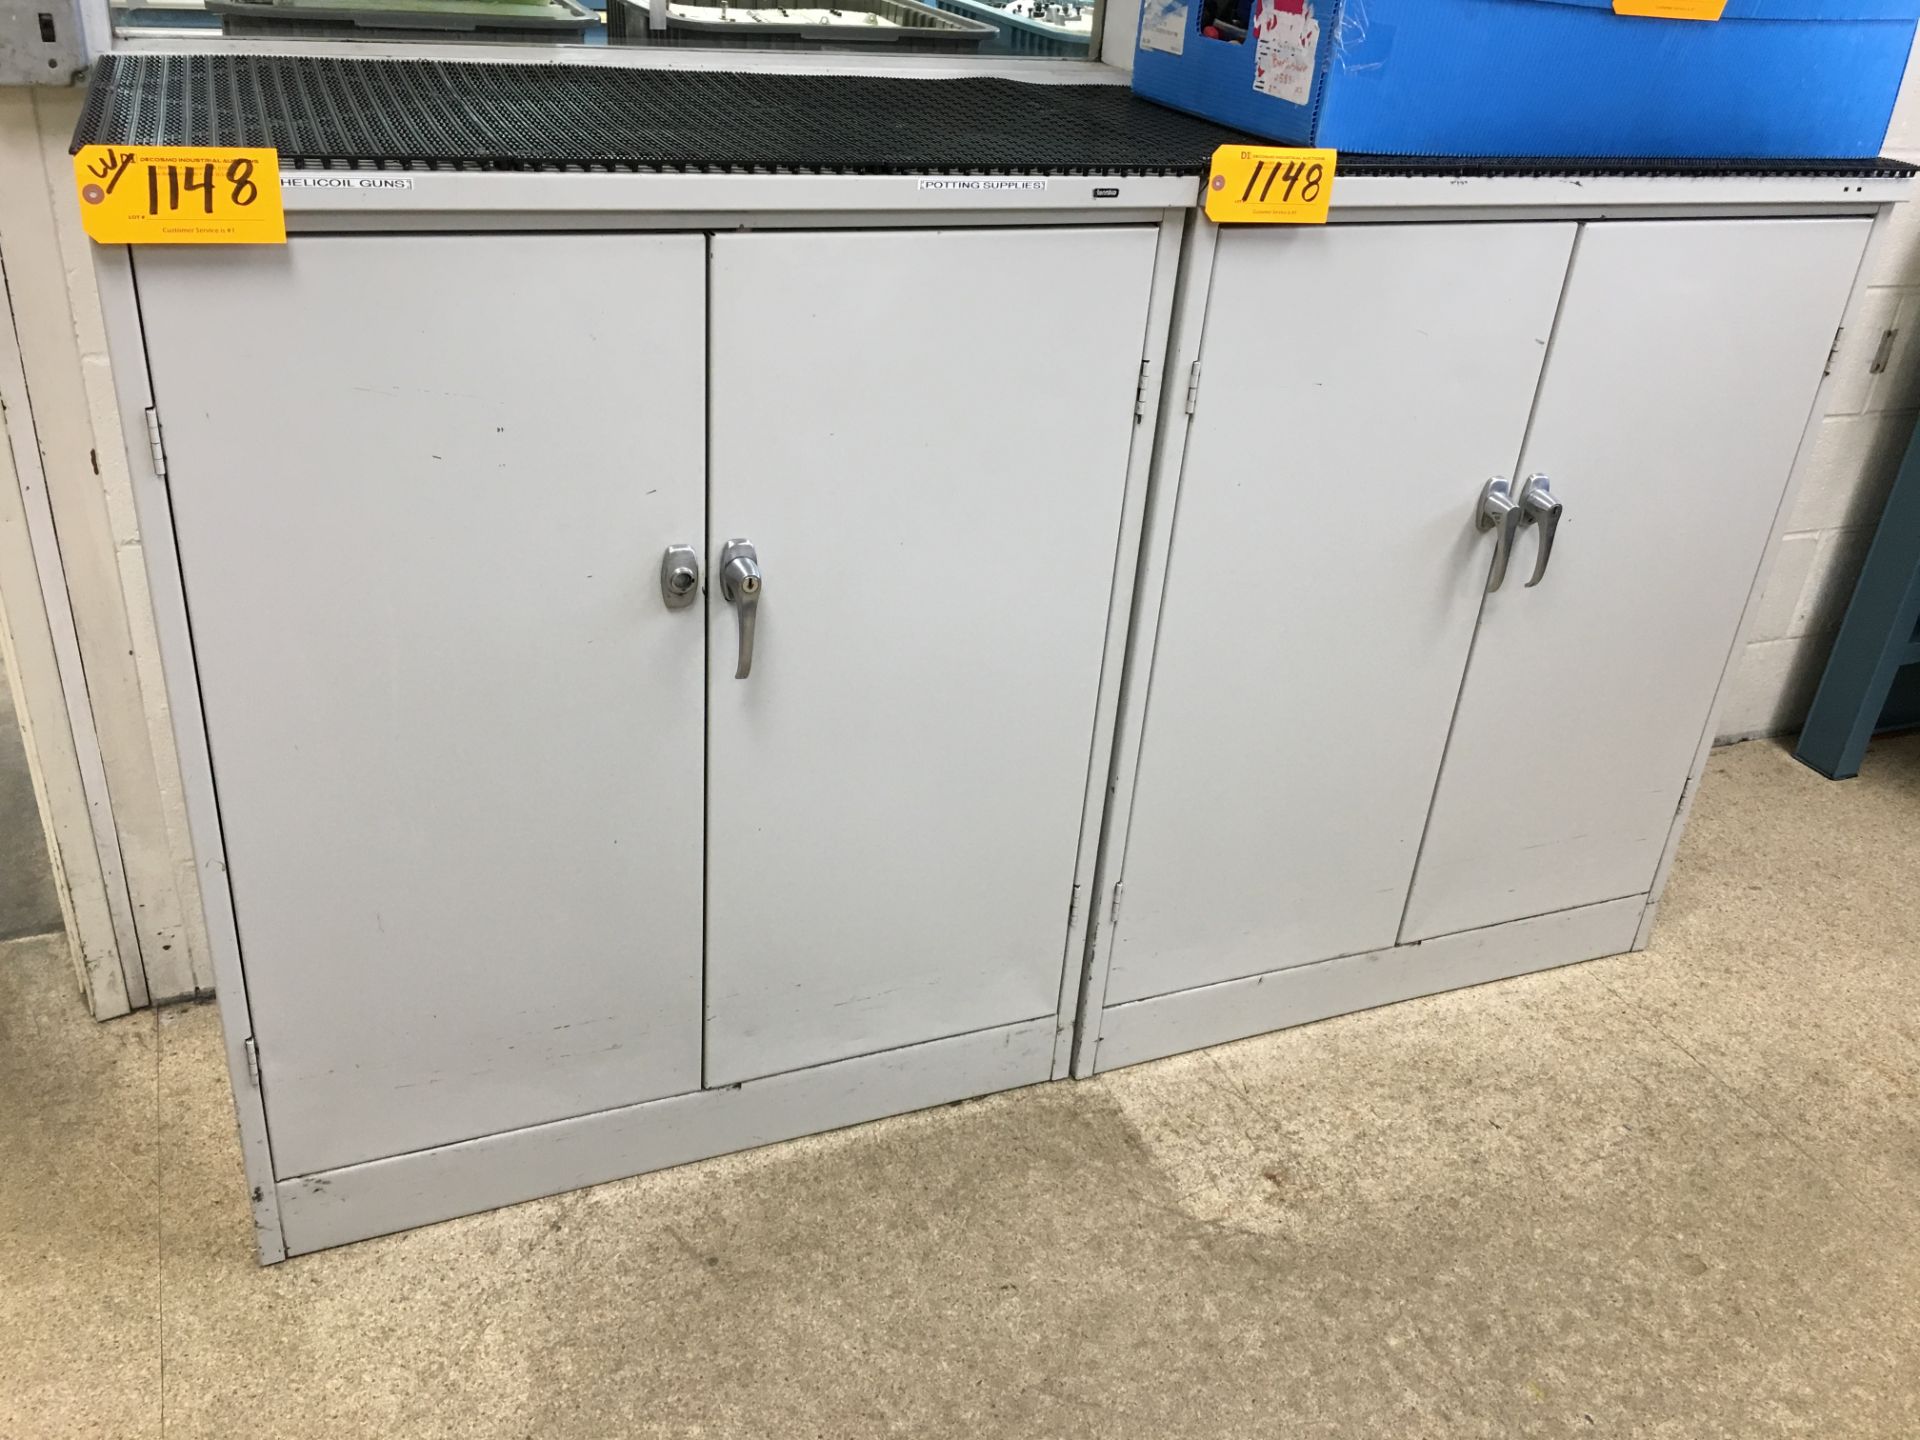 (2) 2-DOOR CABINETS WITH CONTENTS